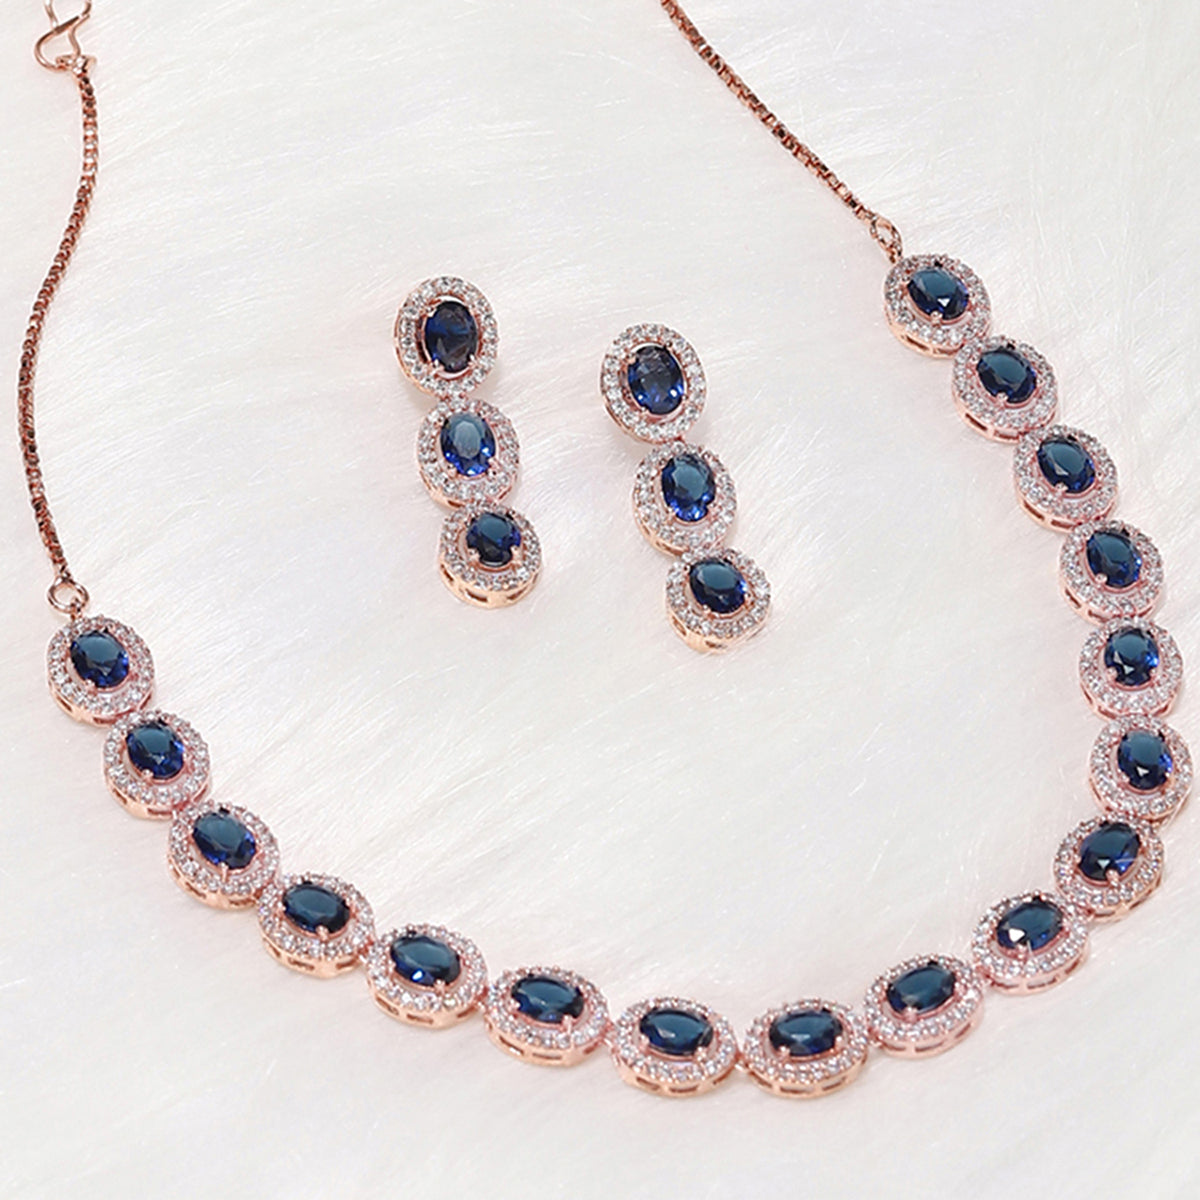 Lovely Blue Stone Necklace - South India Jewels